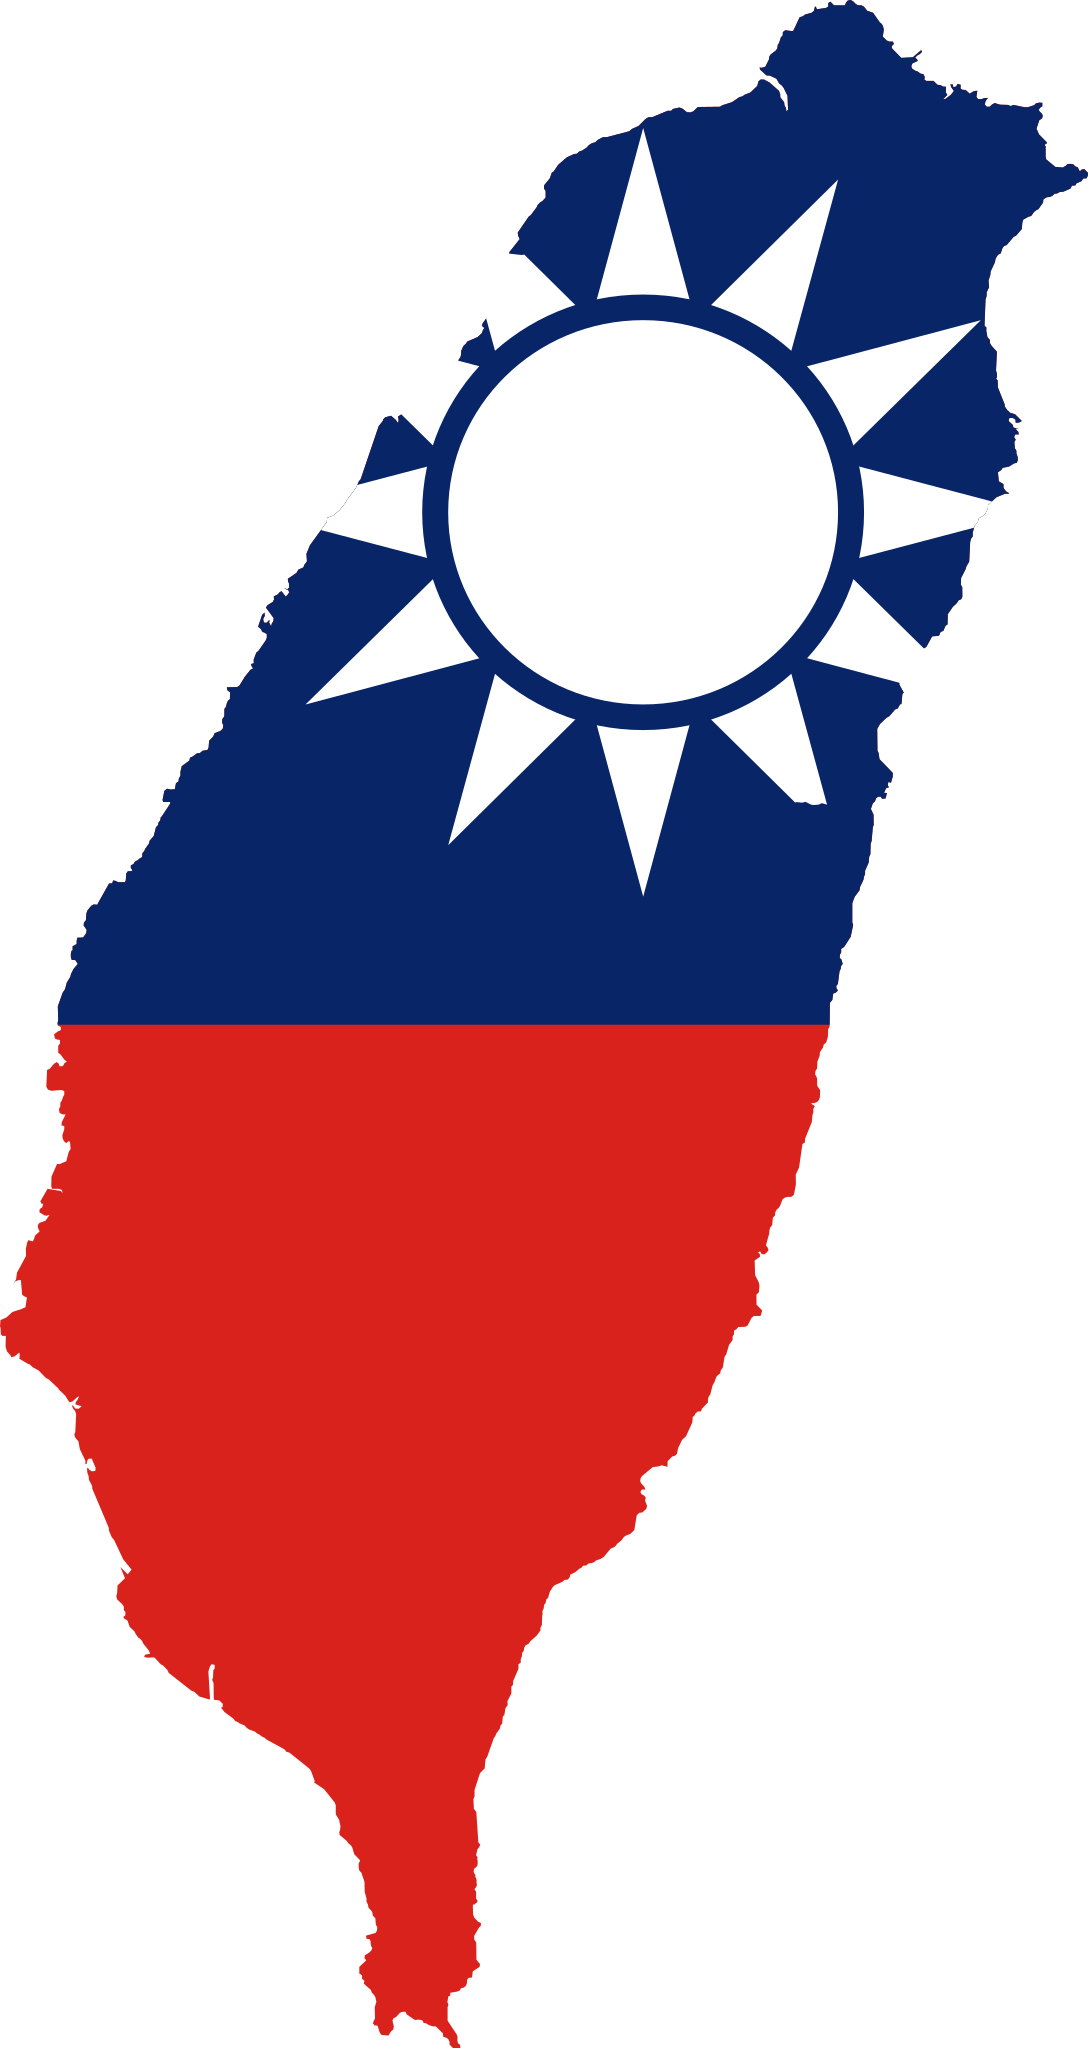 Taiwan Flag PNG Background